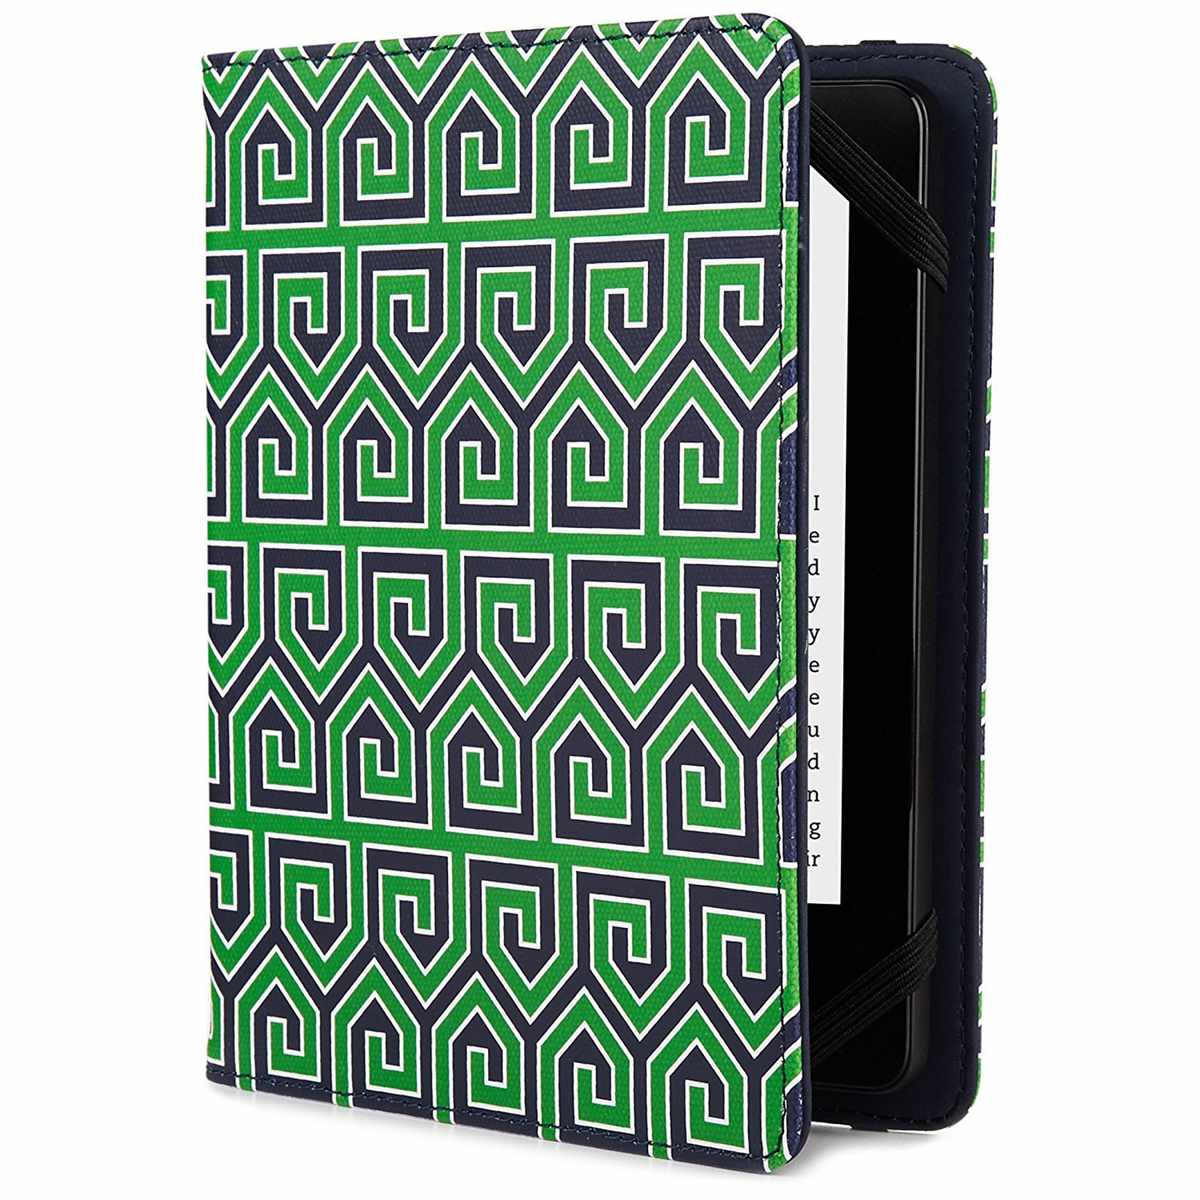 A KINDLE COVER